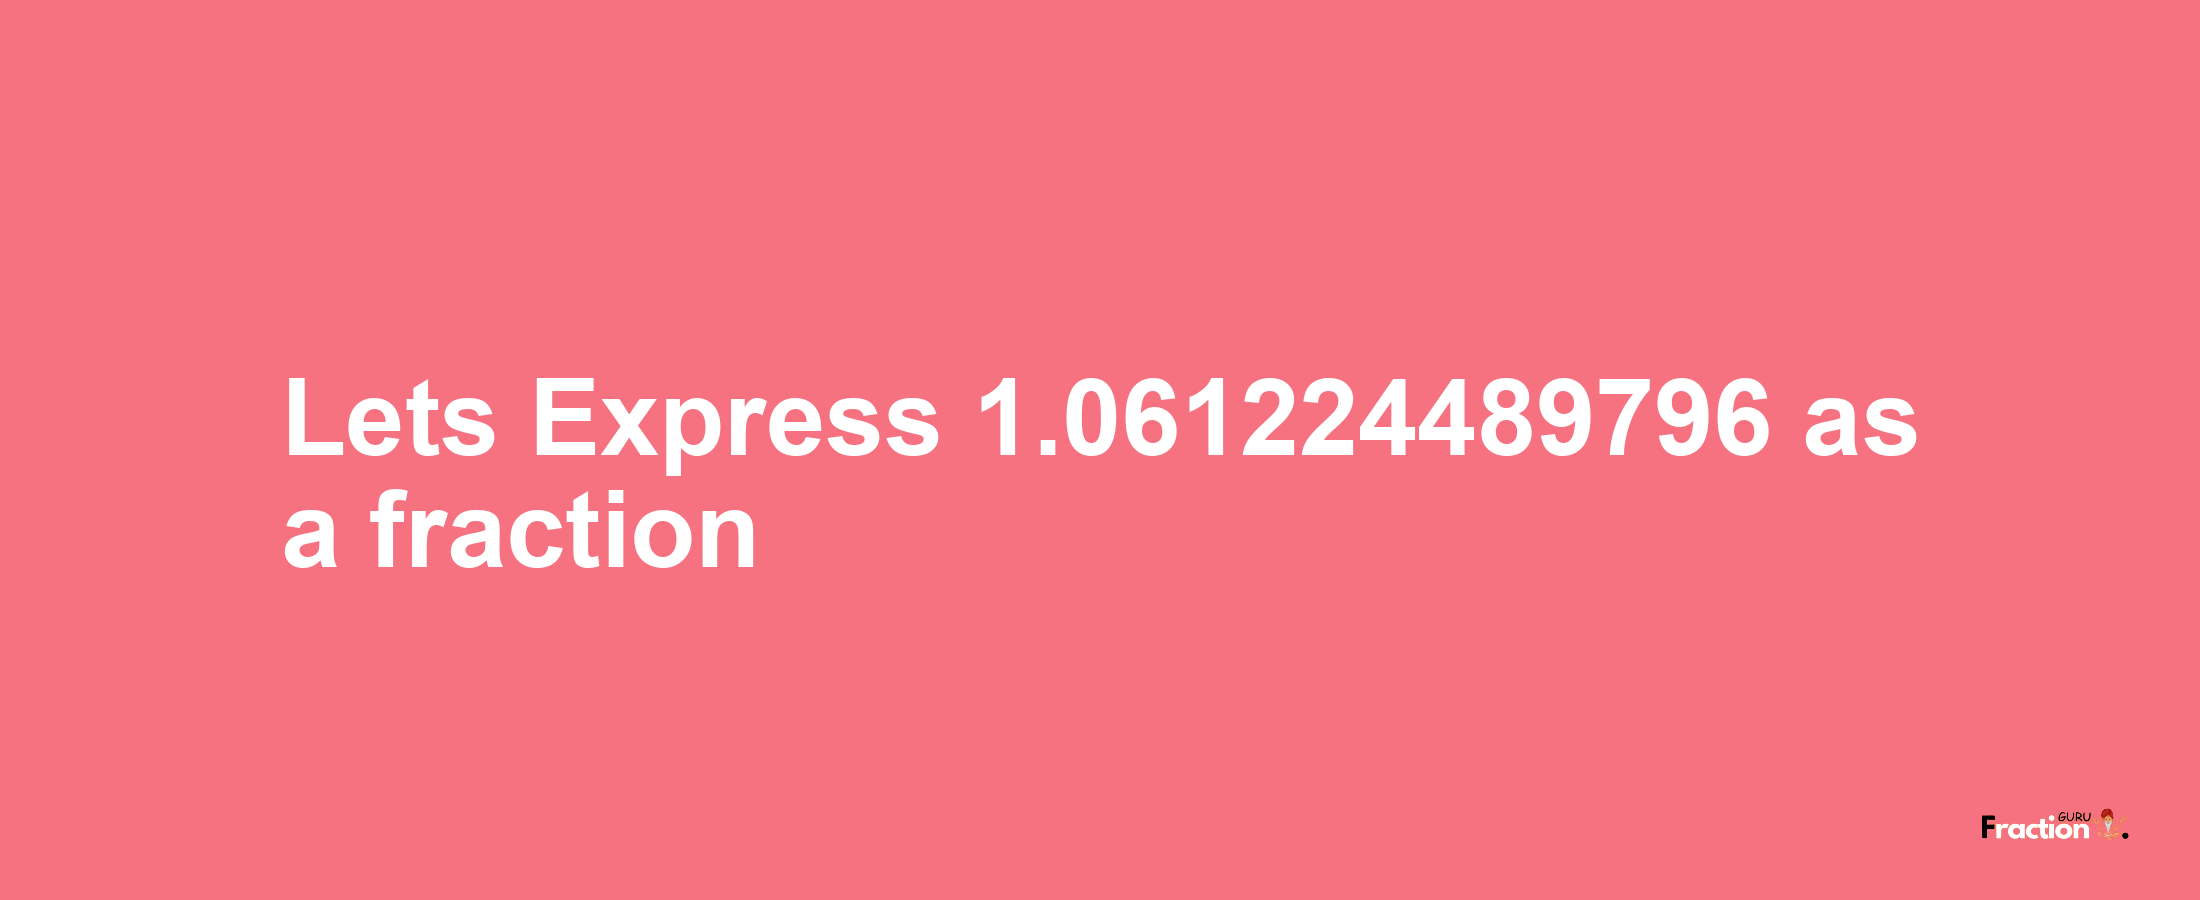 Lets Express 1.061224489796 as afraction